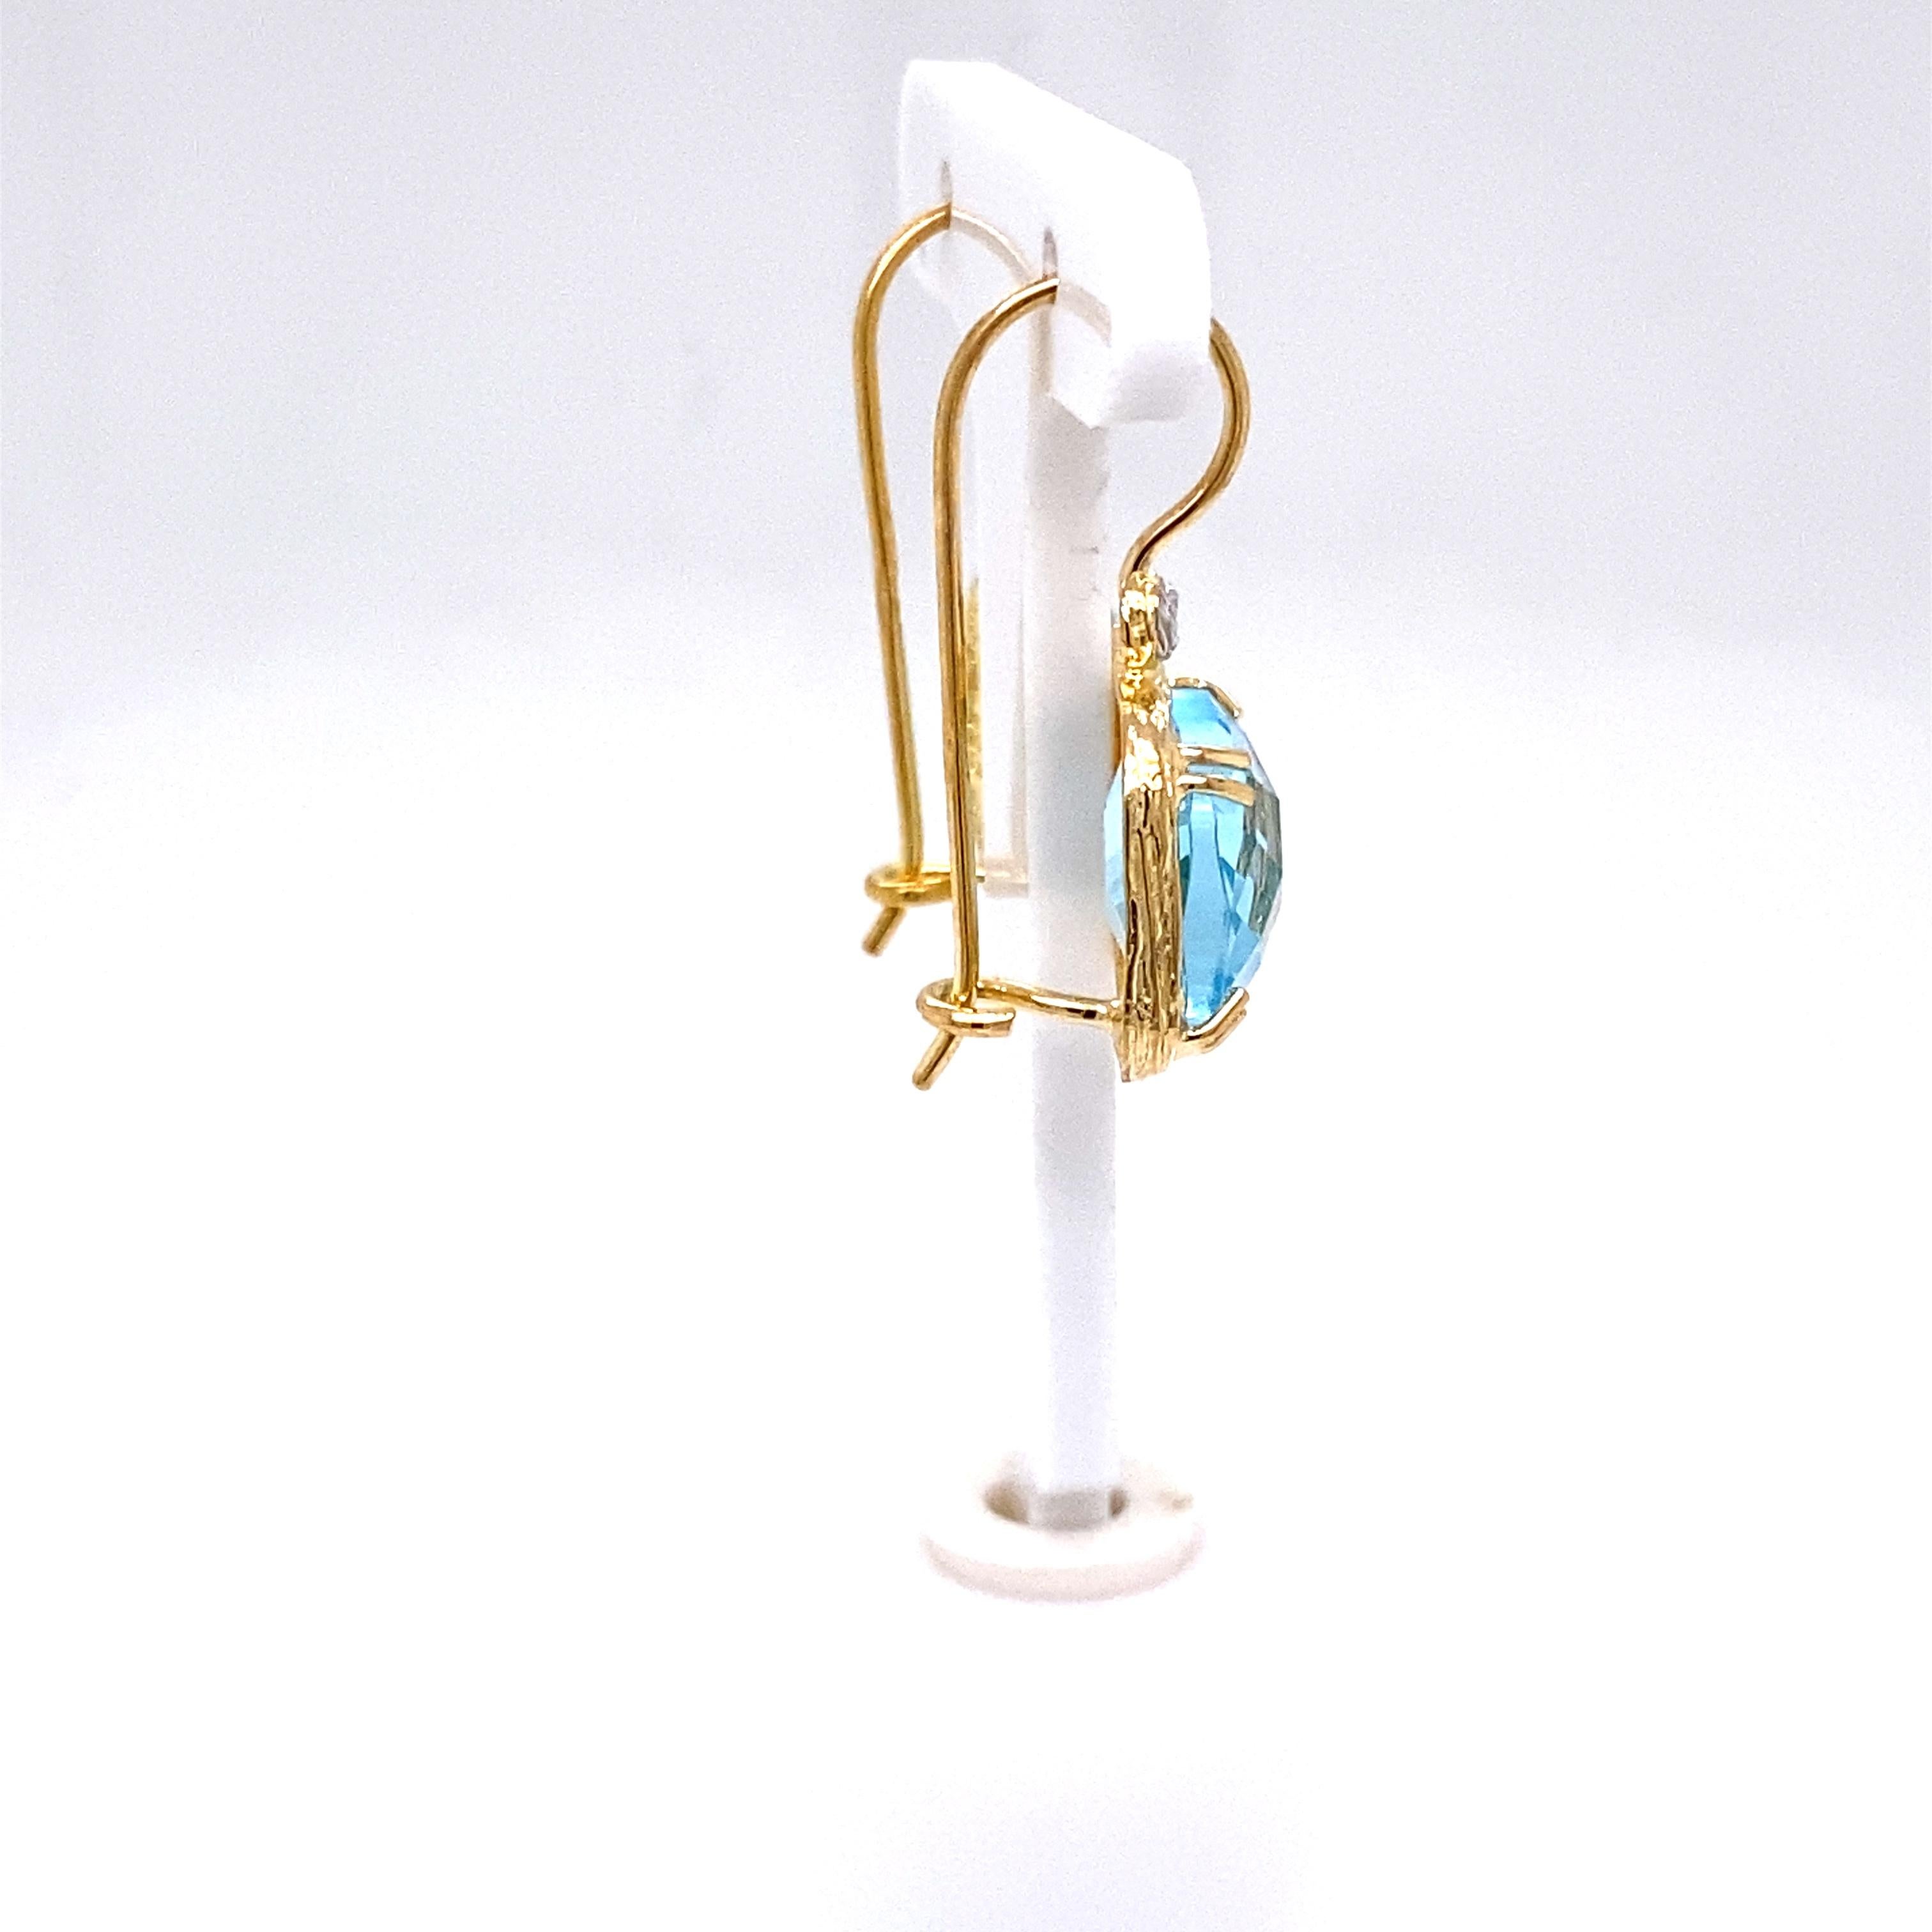 14 Karat Yellow Gold Hand-Crafted Polish-Finished 10mm Checkerboard-Cut Cushion-Shaped Blue Topaz Semi-Precious Color Stone Drop Earrings, Accented with 0.04 Carats of Bezel Set Diamonds.
